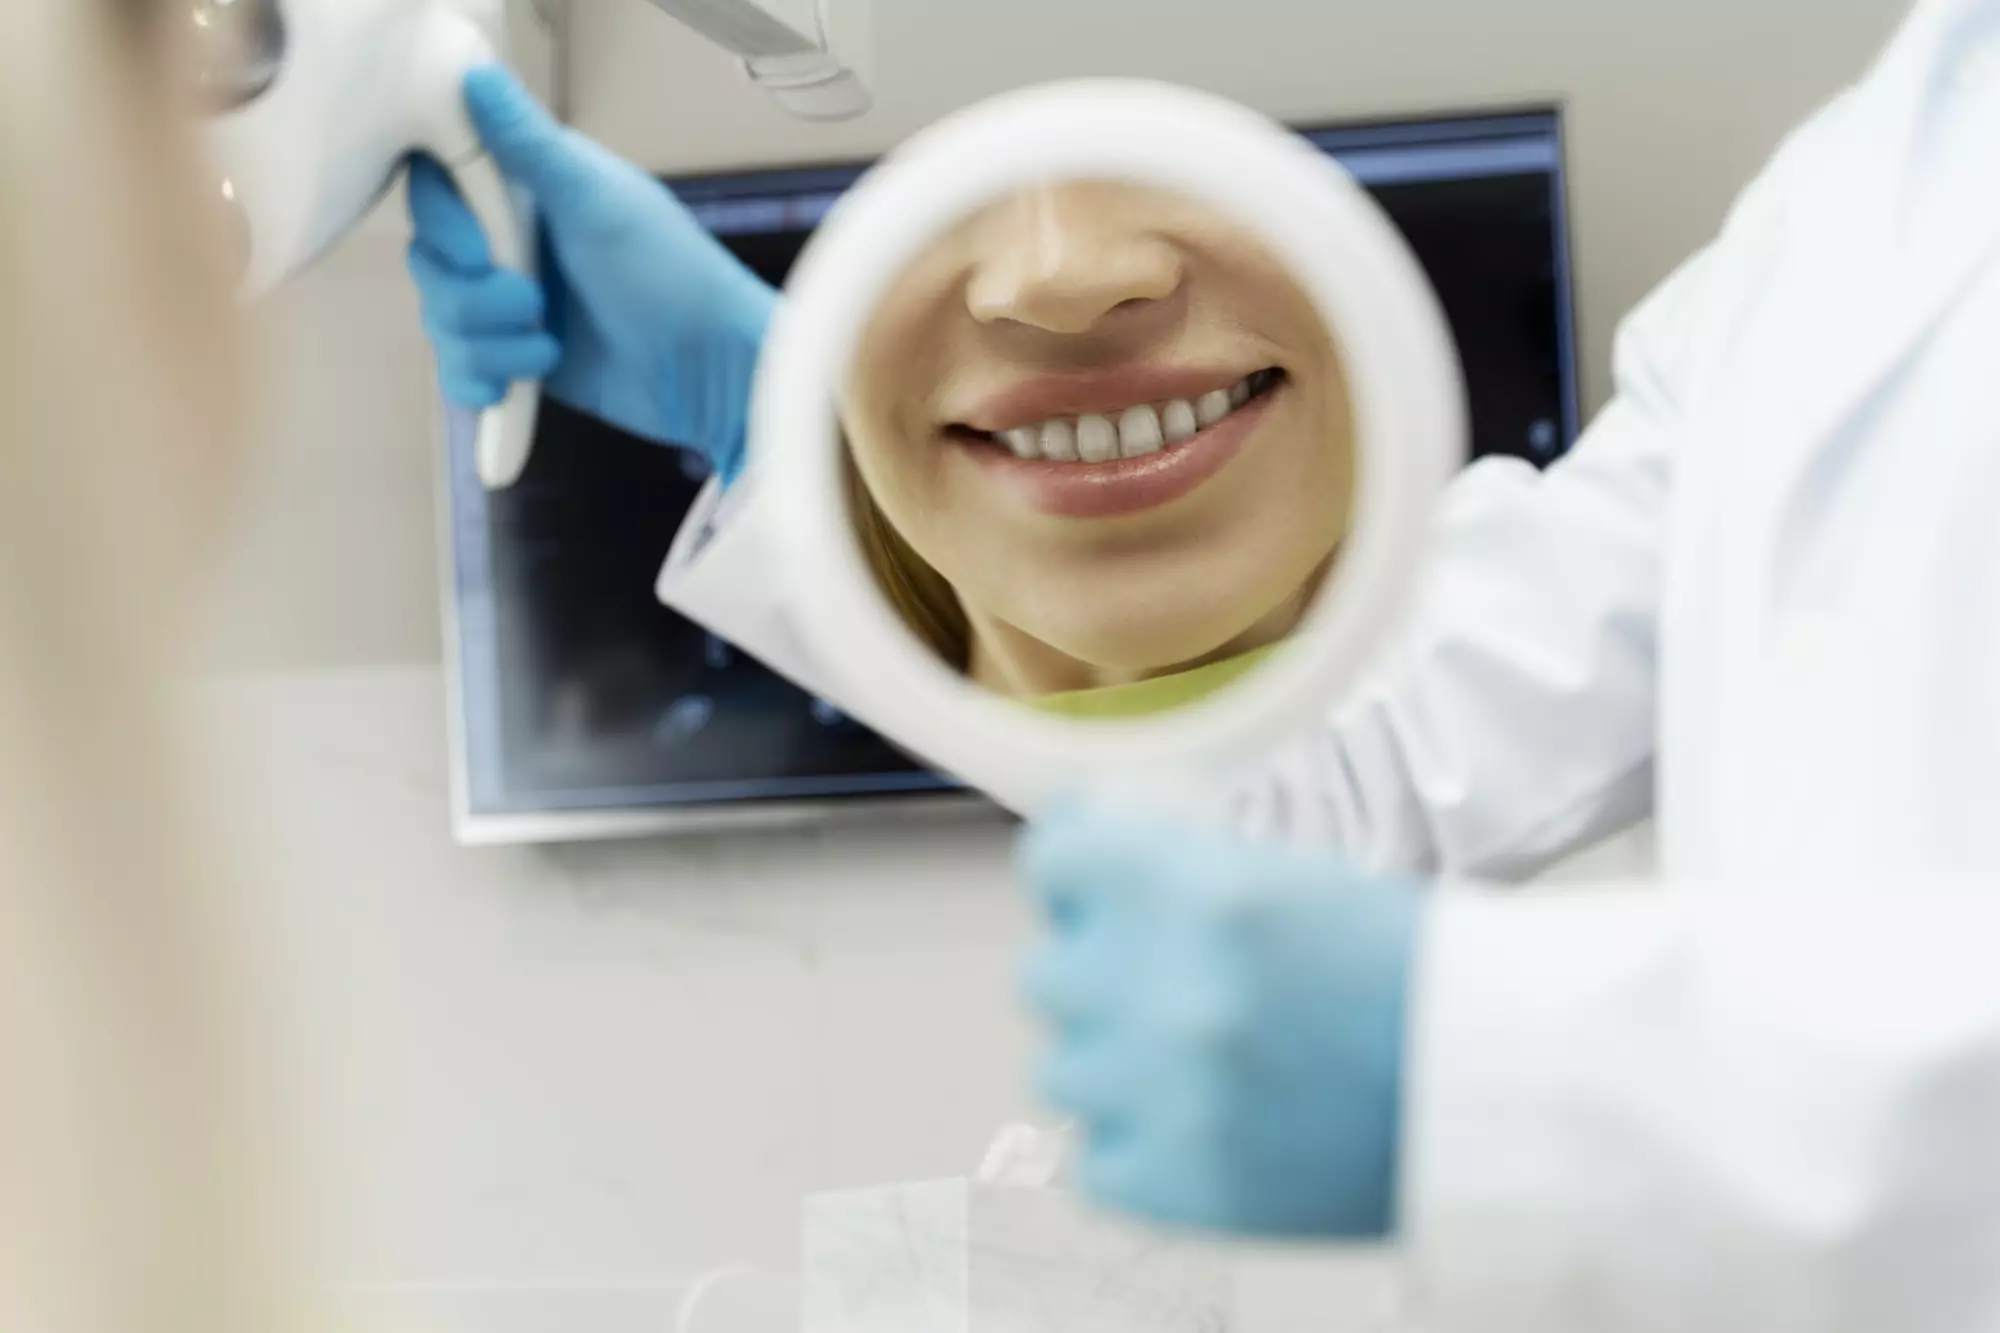 Portrait of female patient with toothy smile looking in mirror after dental treatment. Dental care